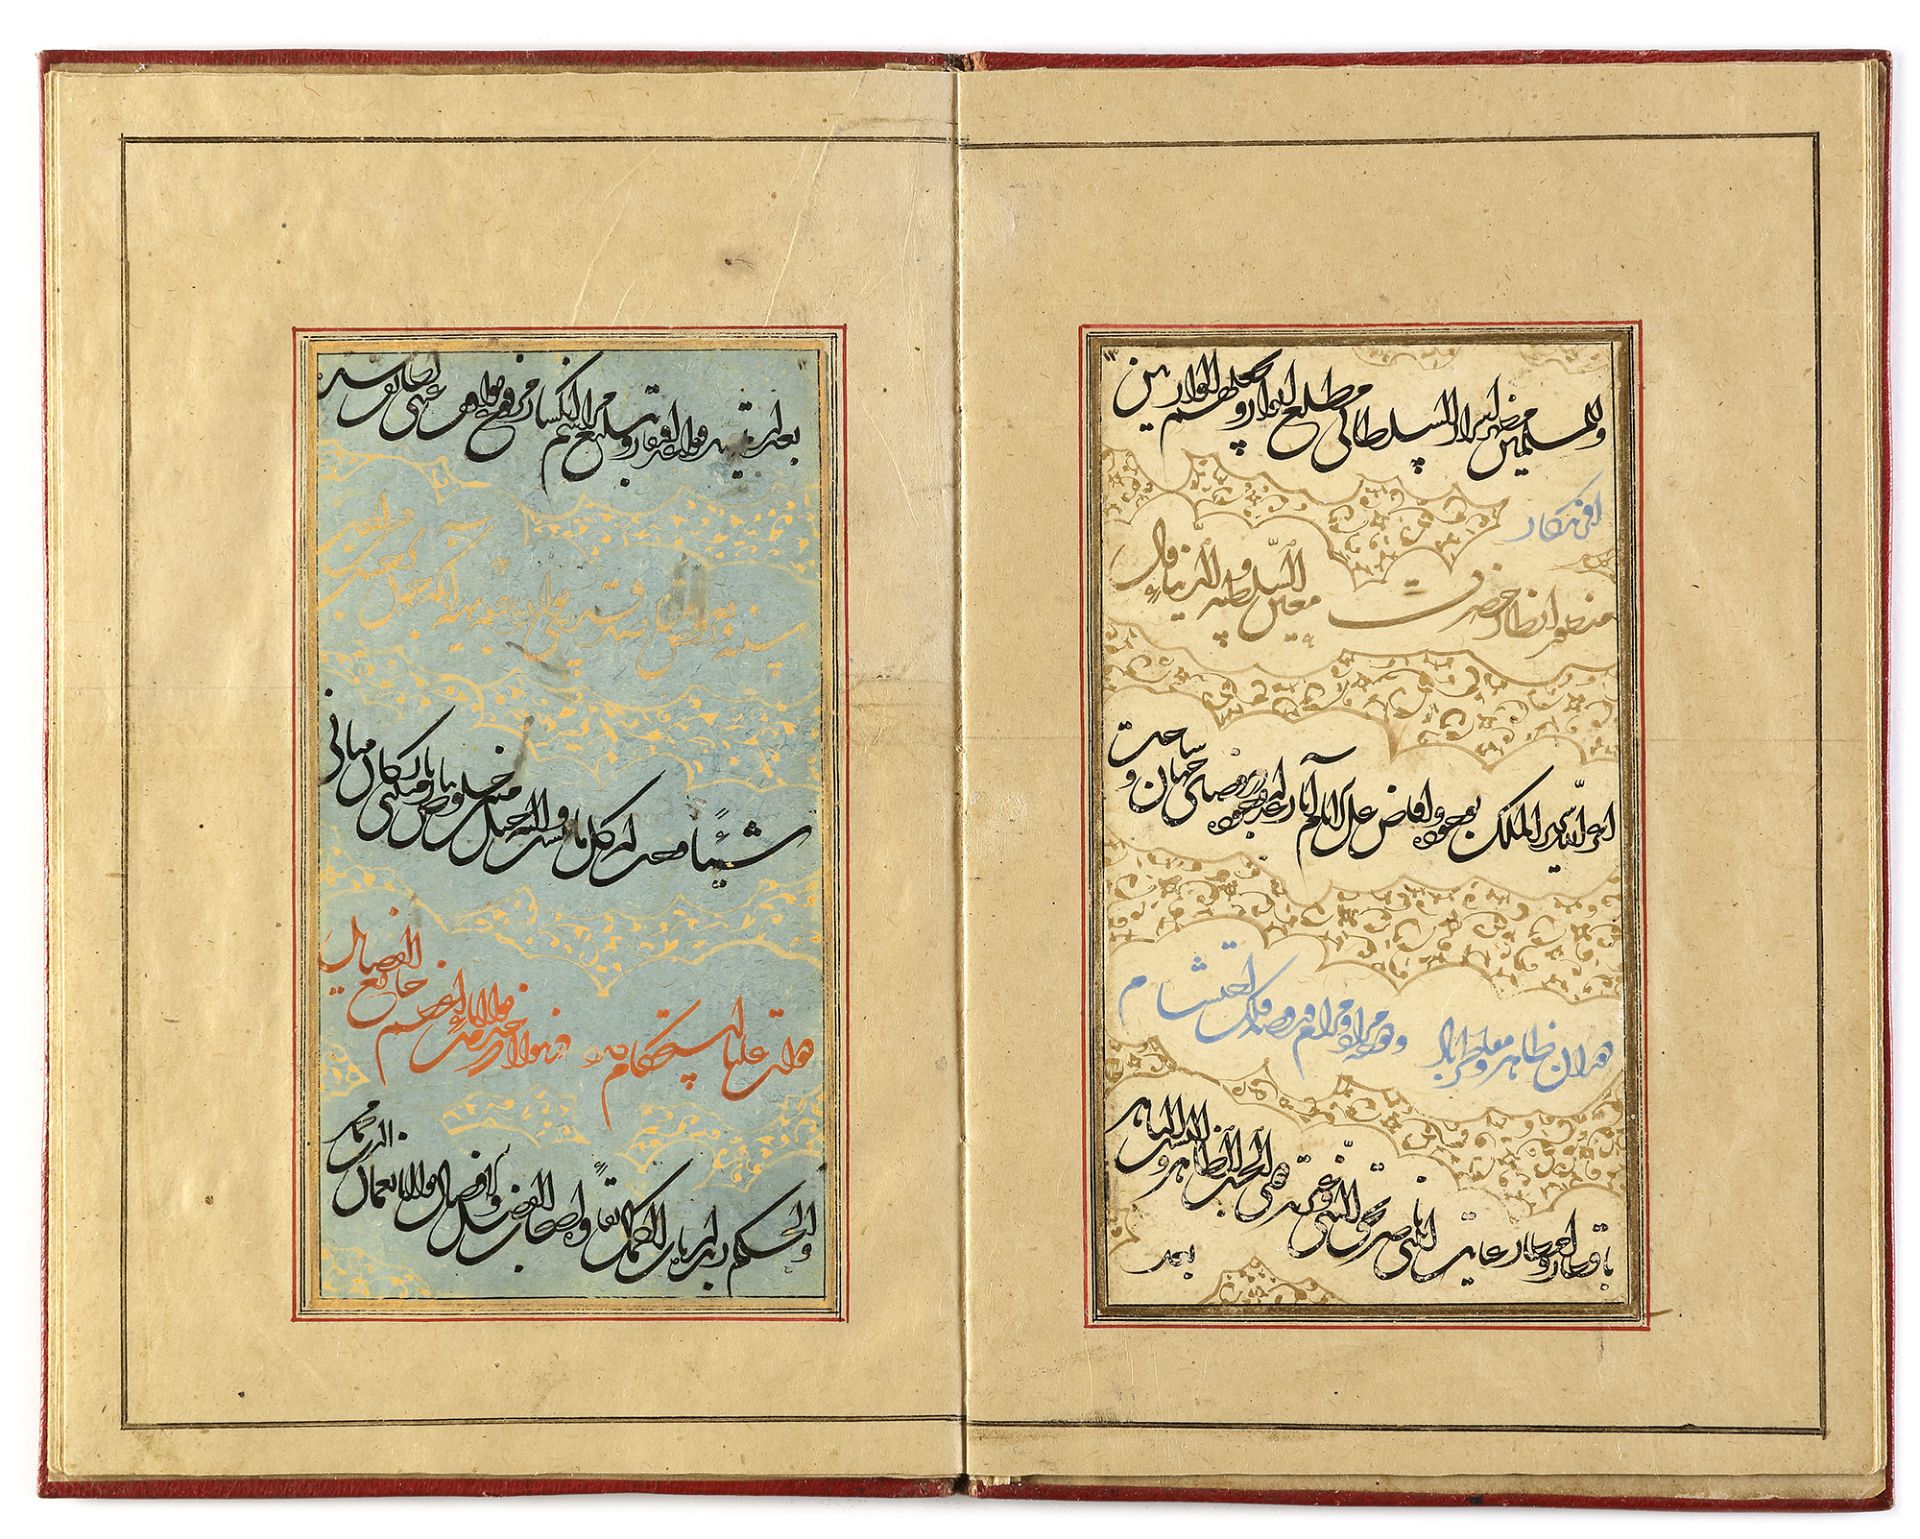 A MANUSCRIPT OF POETRY, SIGNED BY IKHTIYAR AL-MUNSHI, PERSIA, SAVAFID, DATED 975 AH/1567-68 AD - Image 17 of 18